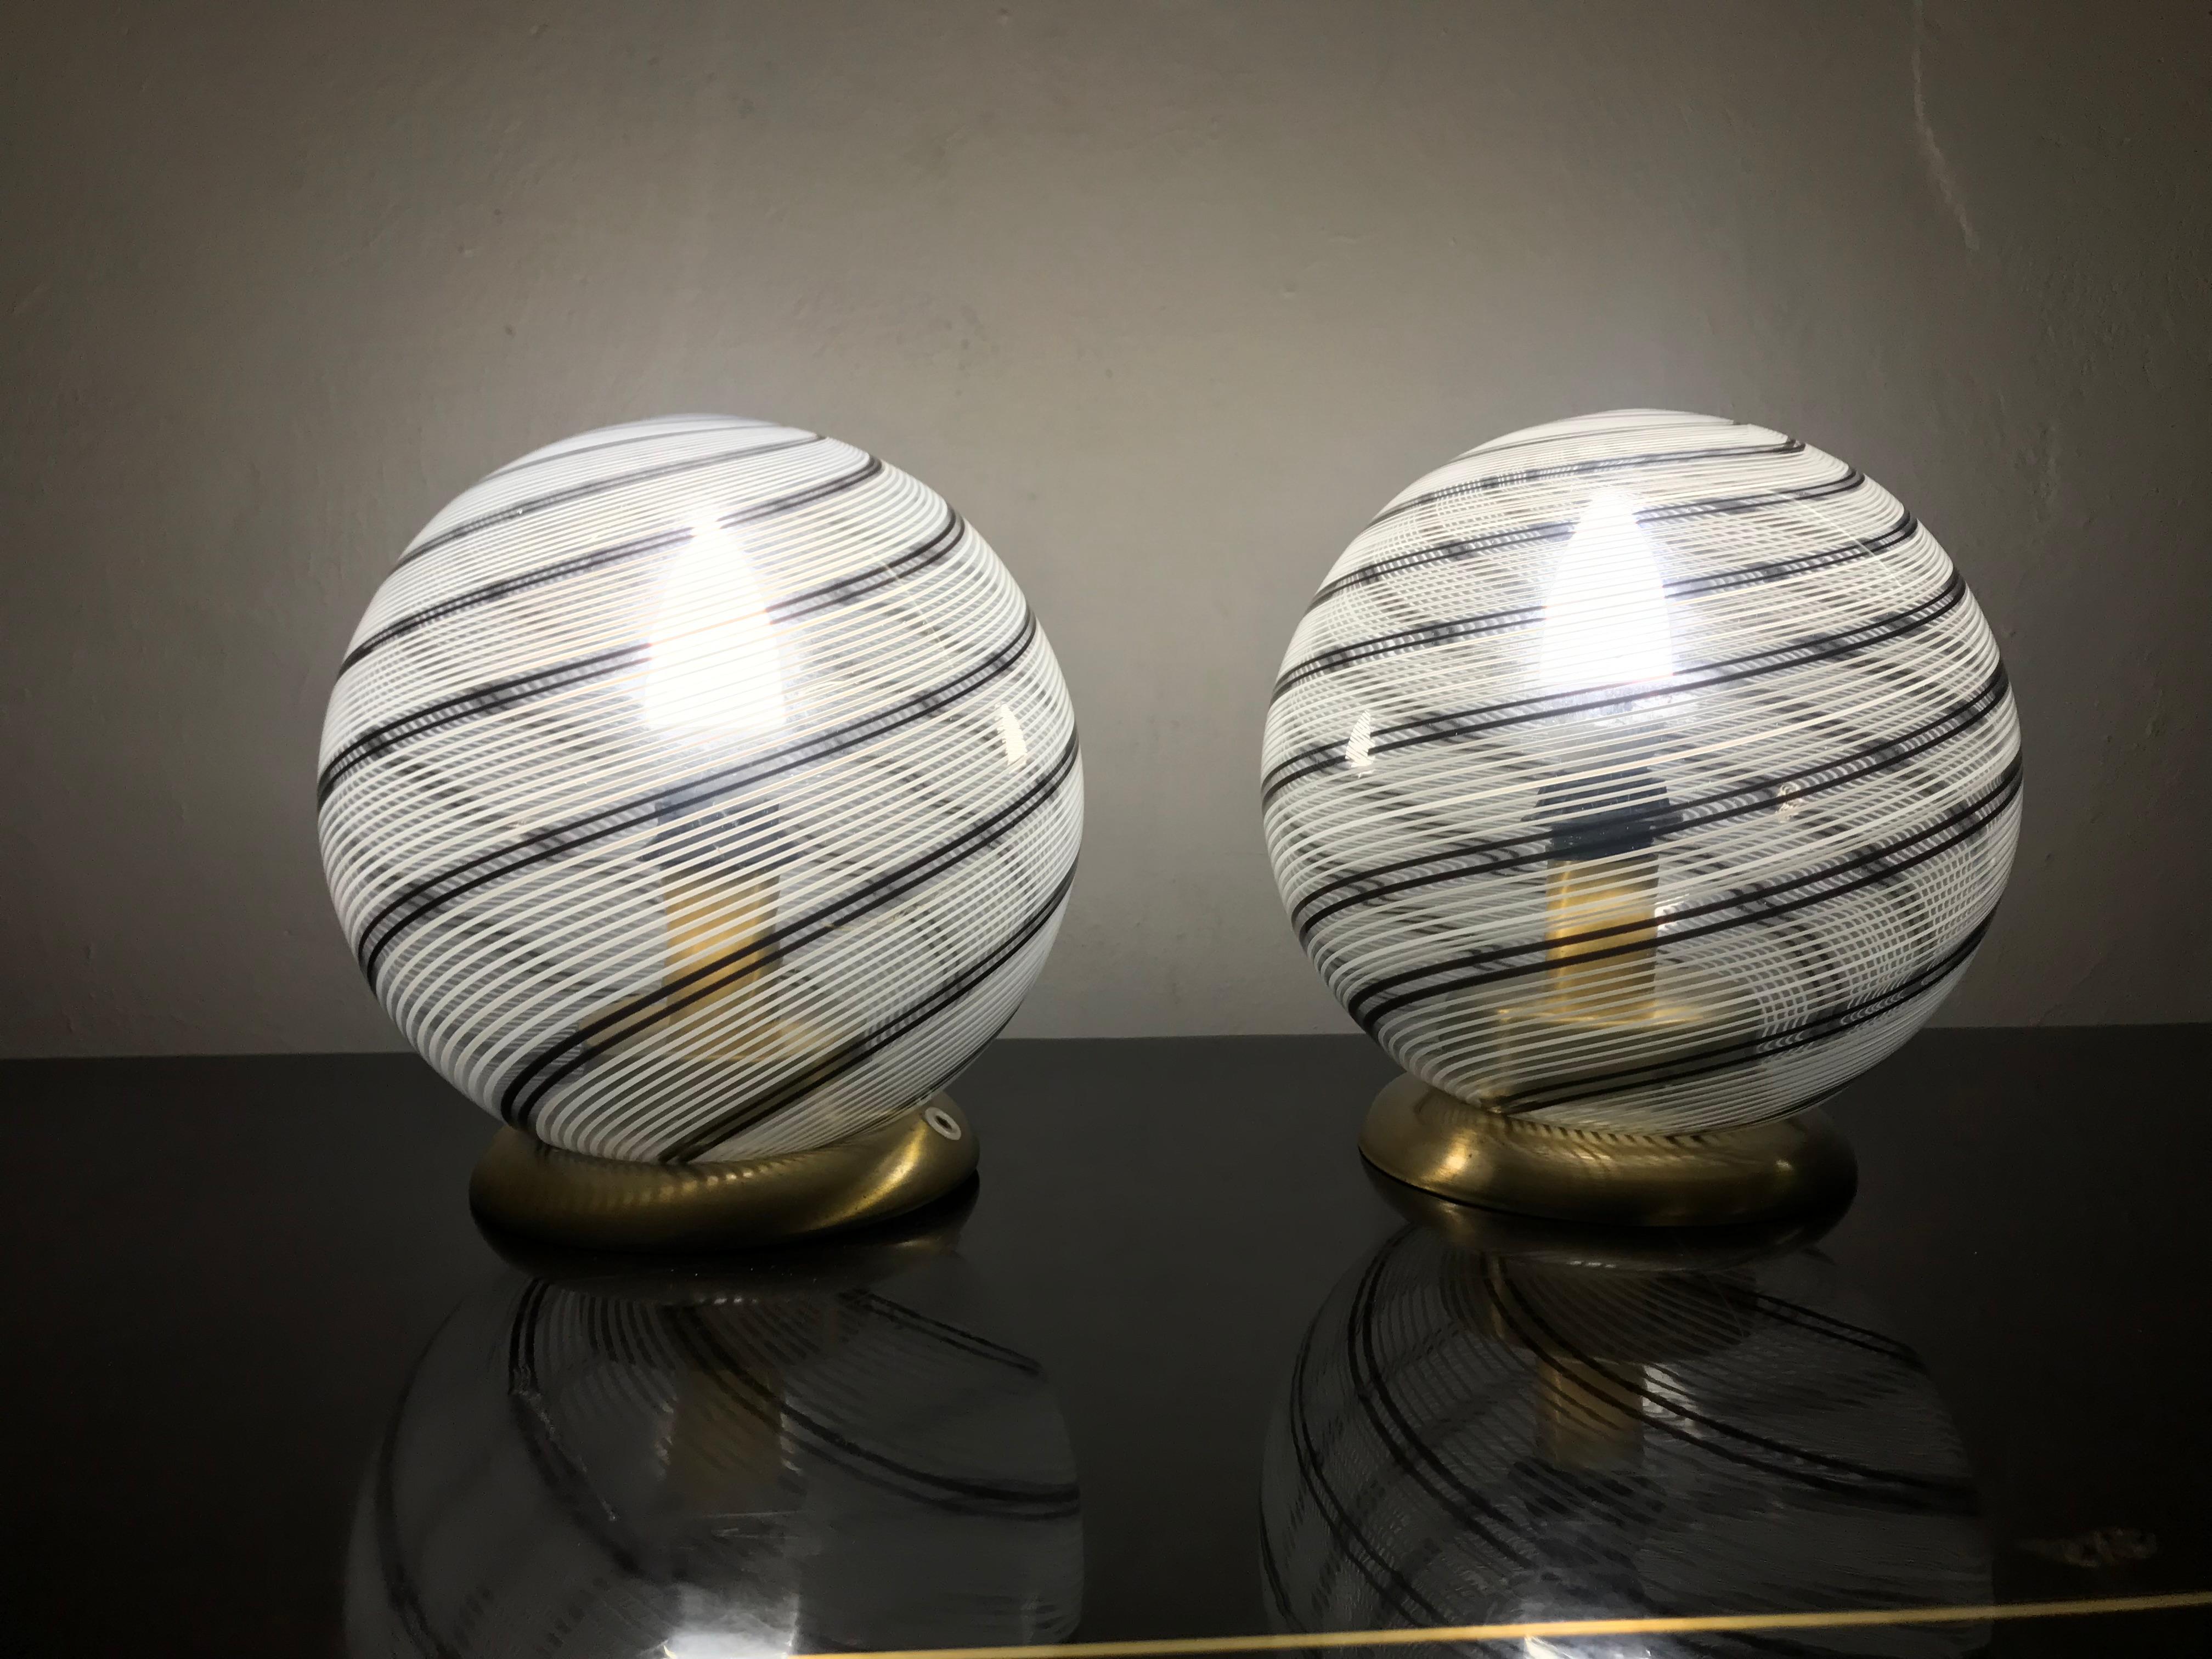 Space Age pair of table lamps by in hand blown clear, white and black 'Tessuto' technique Murano glass attributed to Venini, circa 1970.